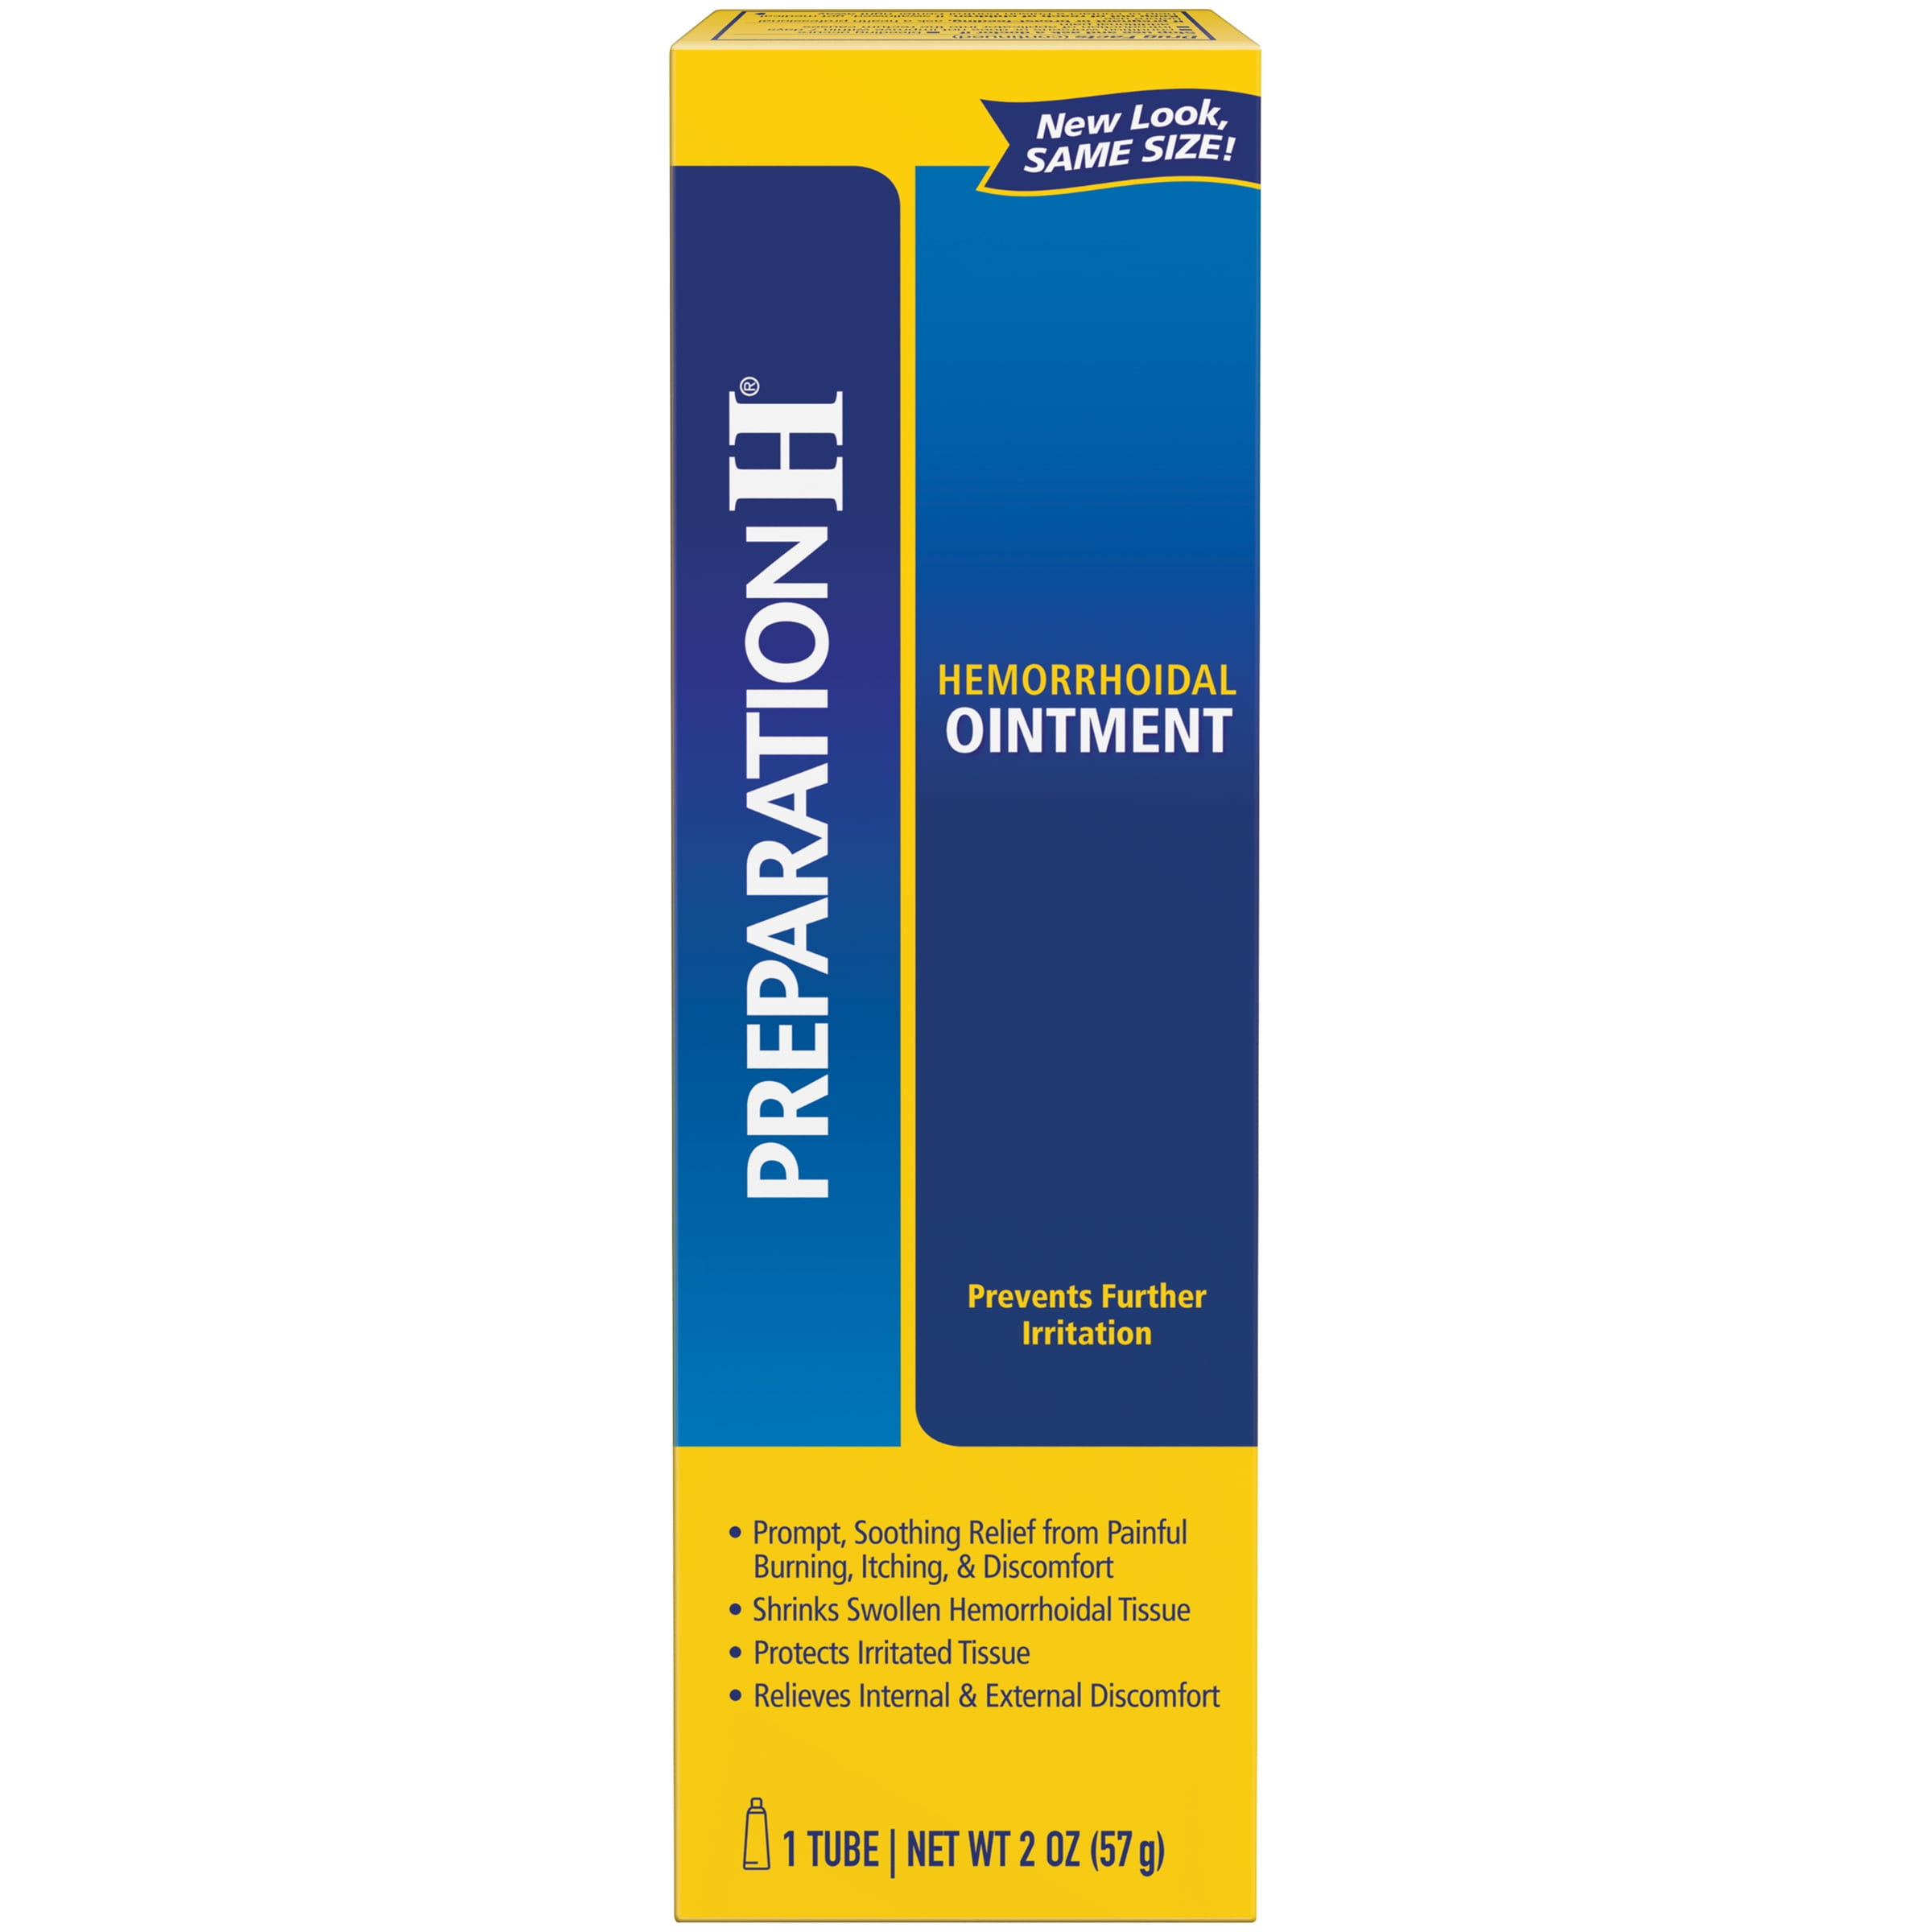 hemorrhoid cream for itching